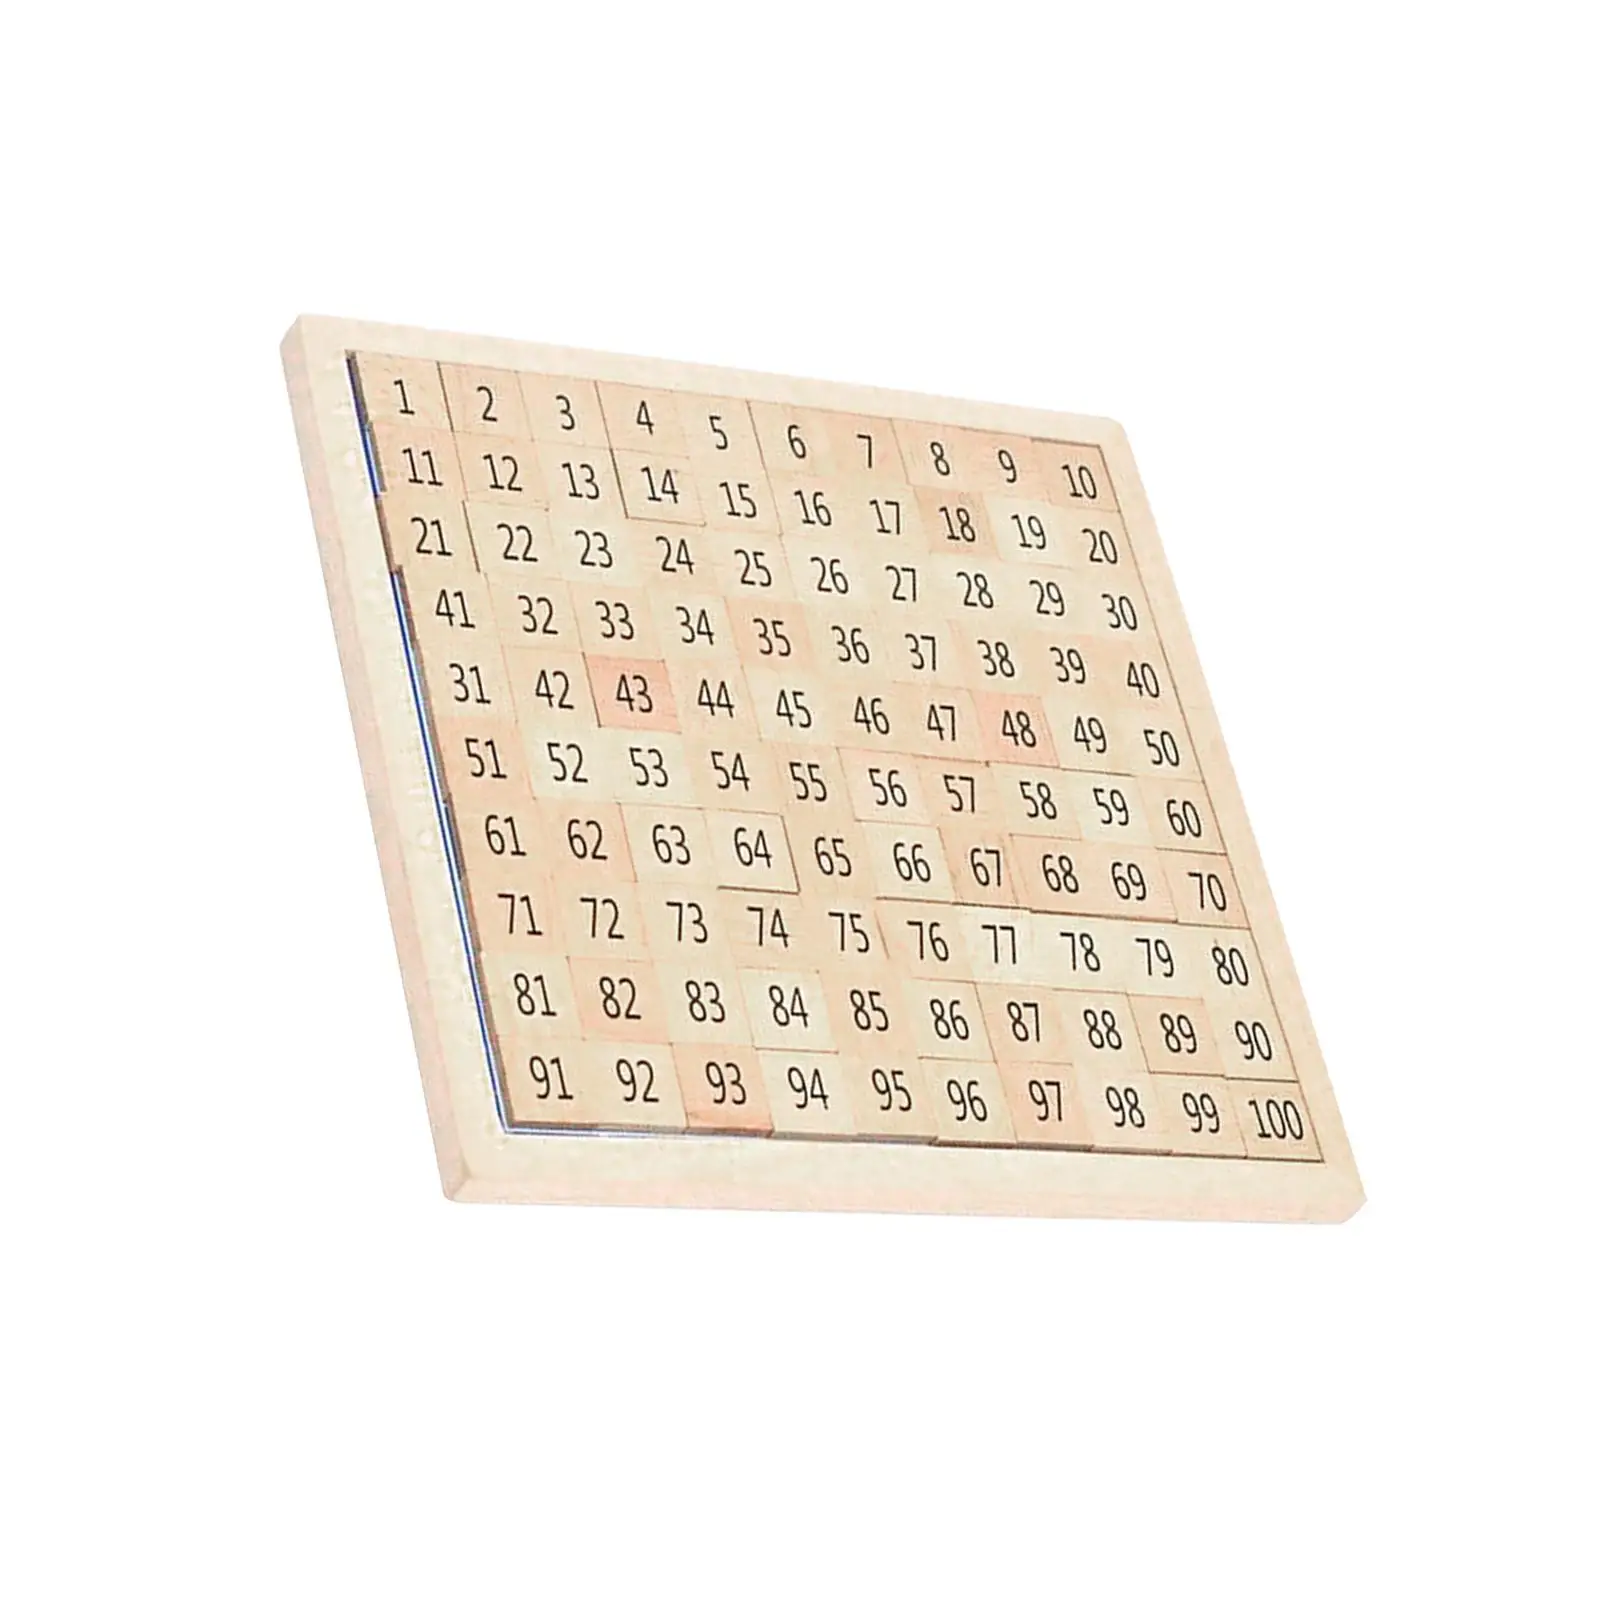 Addition Table Board 1 ~ 100 Numbers Math Teaching Aids for Nursery Kids